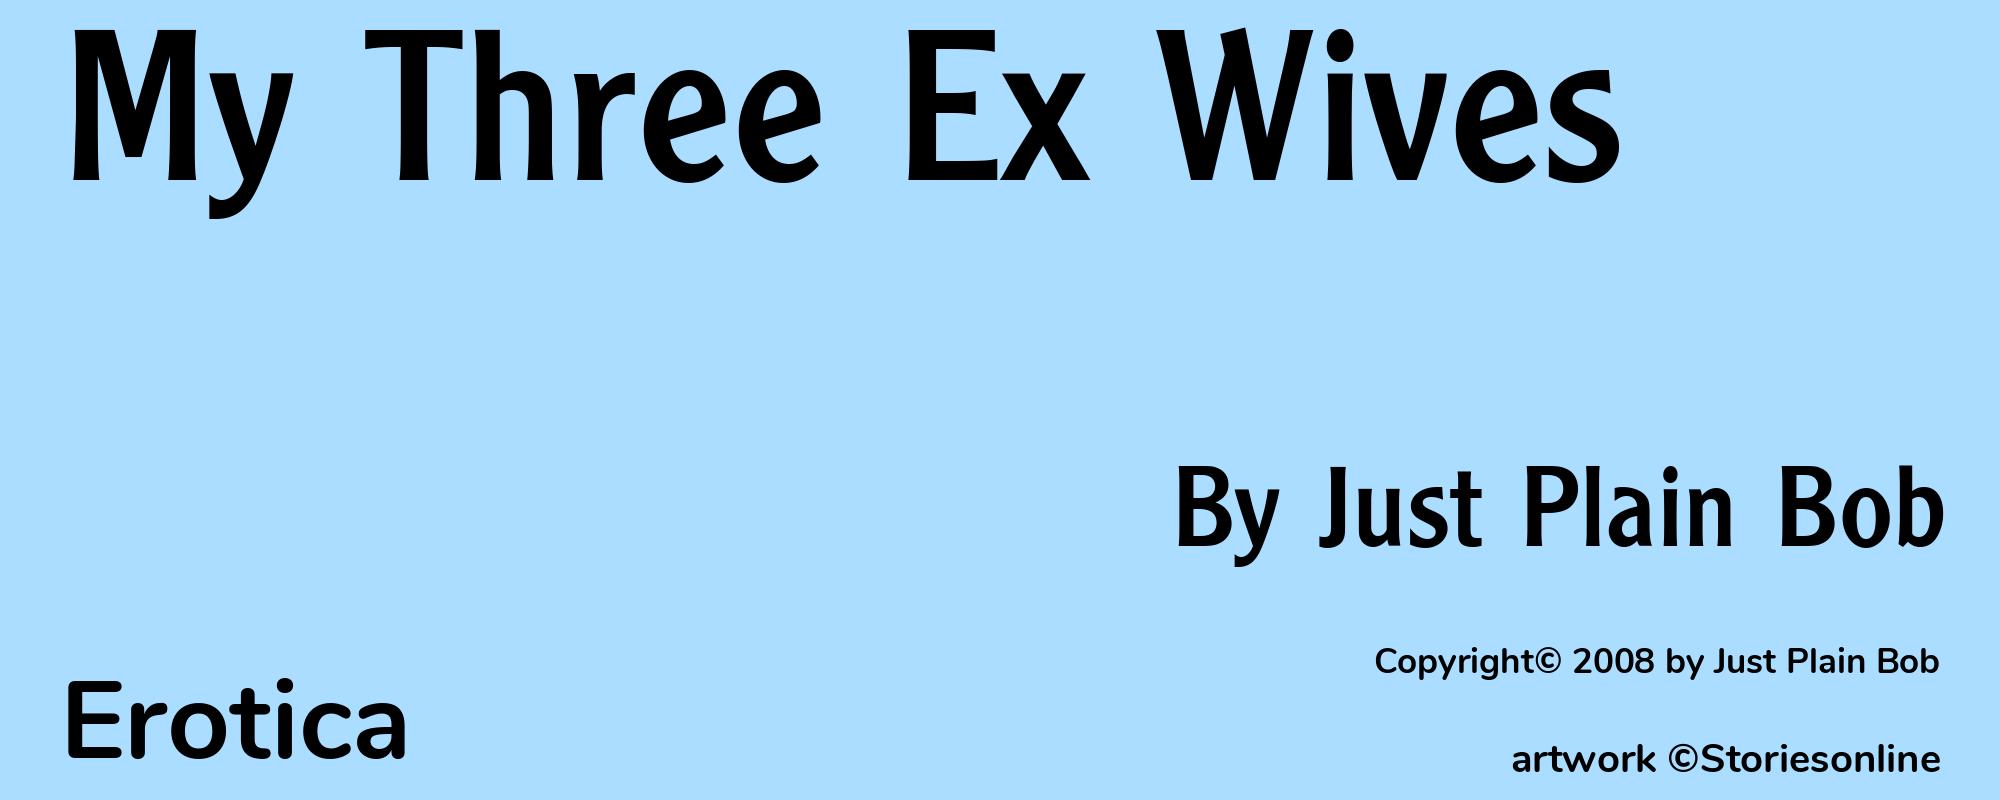 My Three Ex Wives - Cover